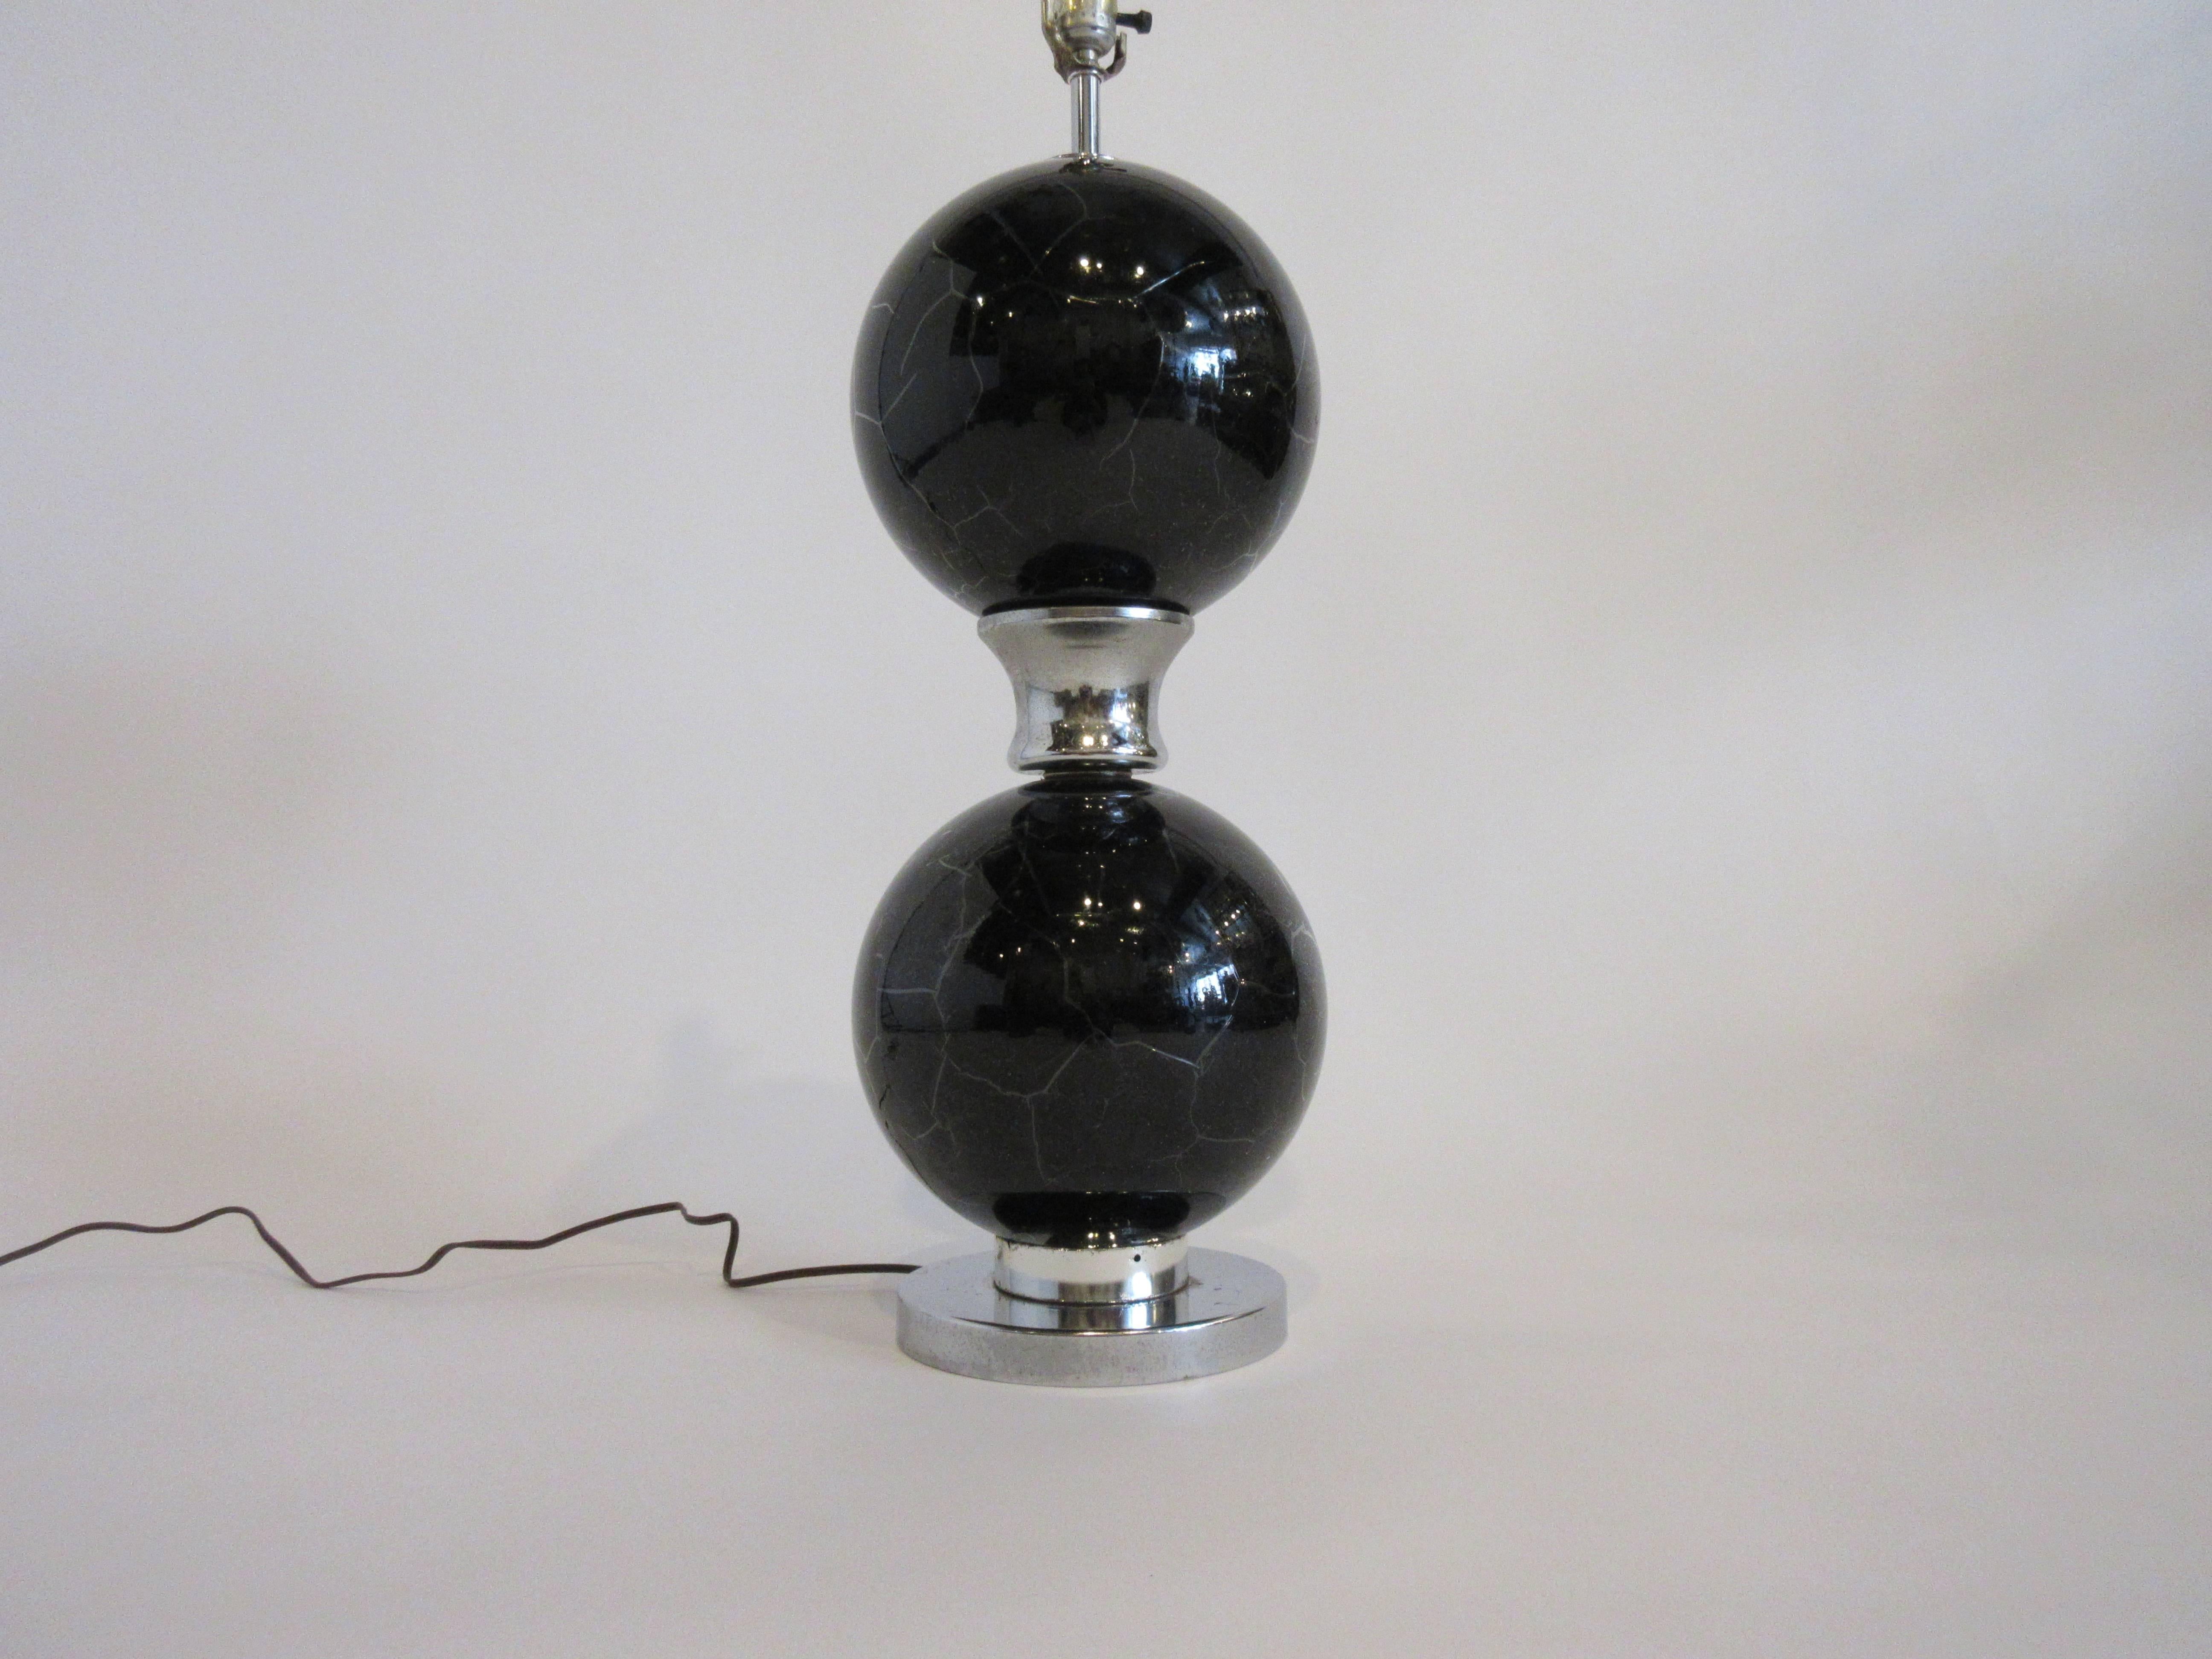 Pair of 1970s black and chrome crackled glass lamps.